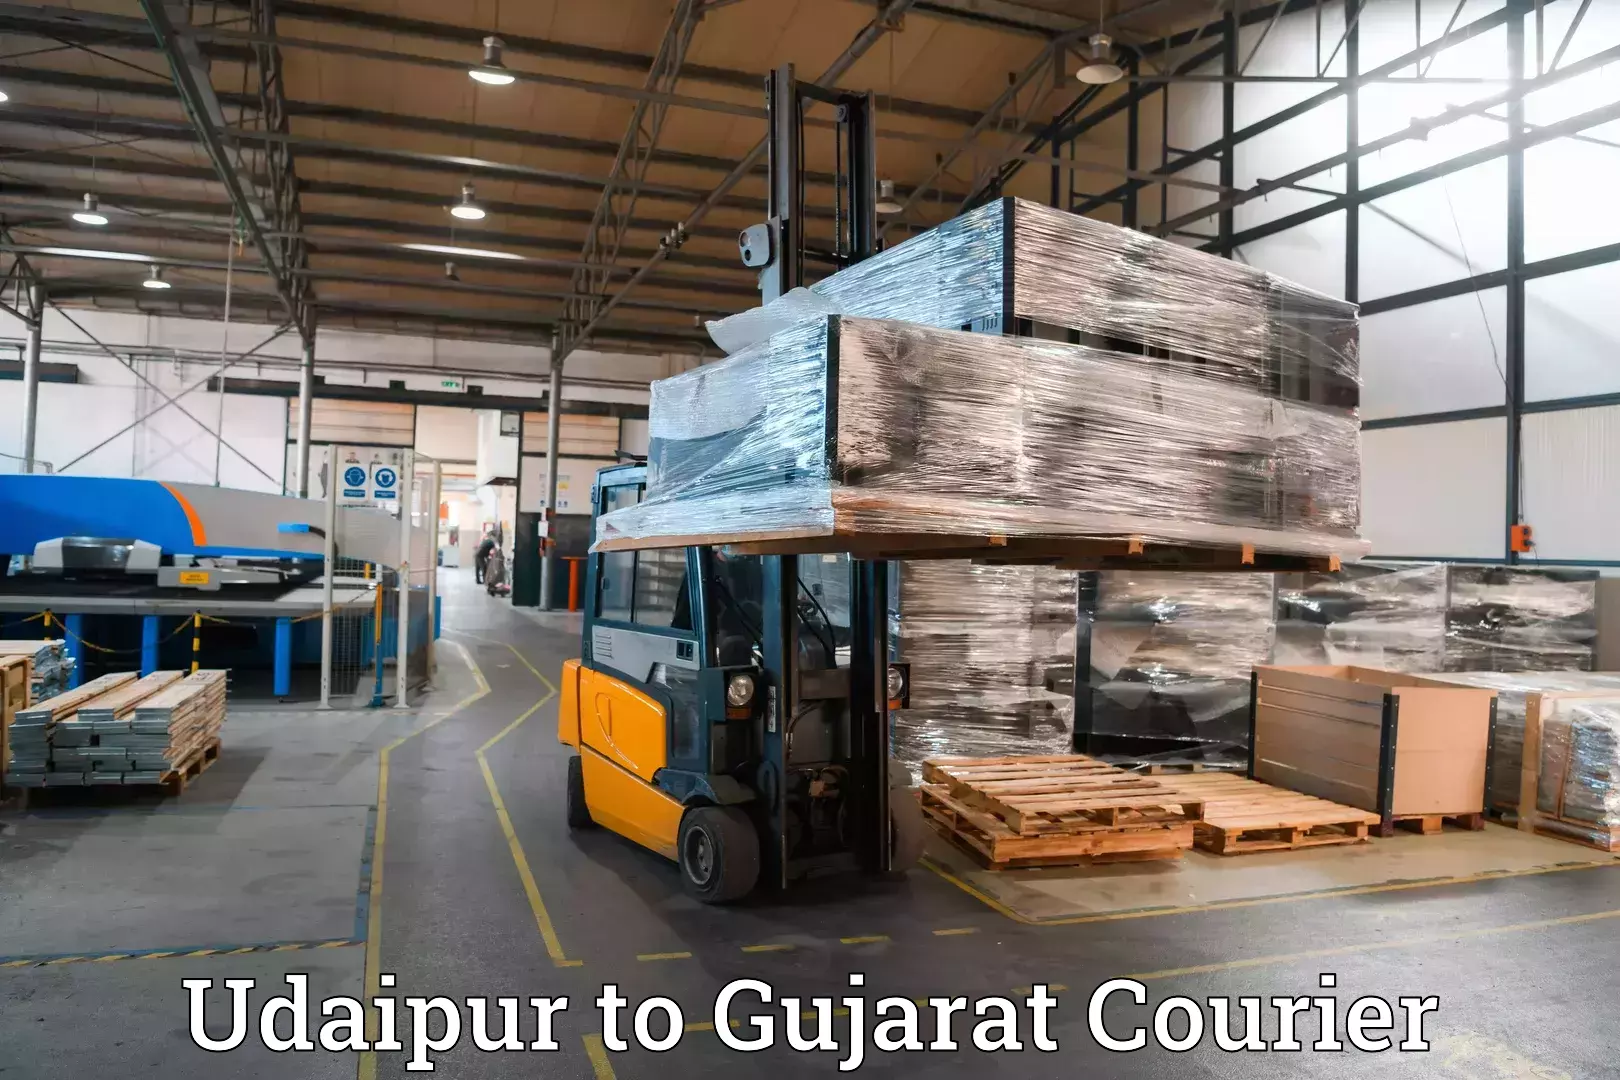 Baggage transport technology in Udaipur to Sanand